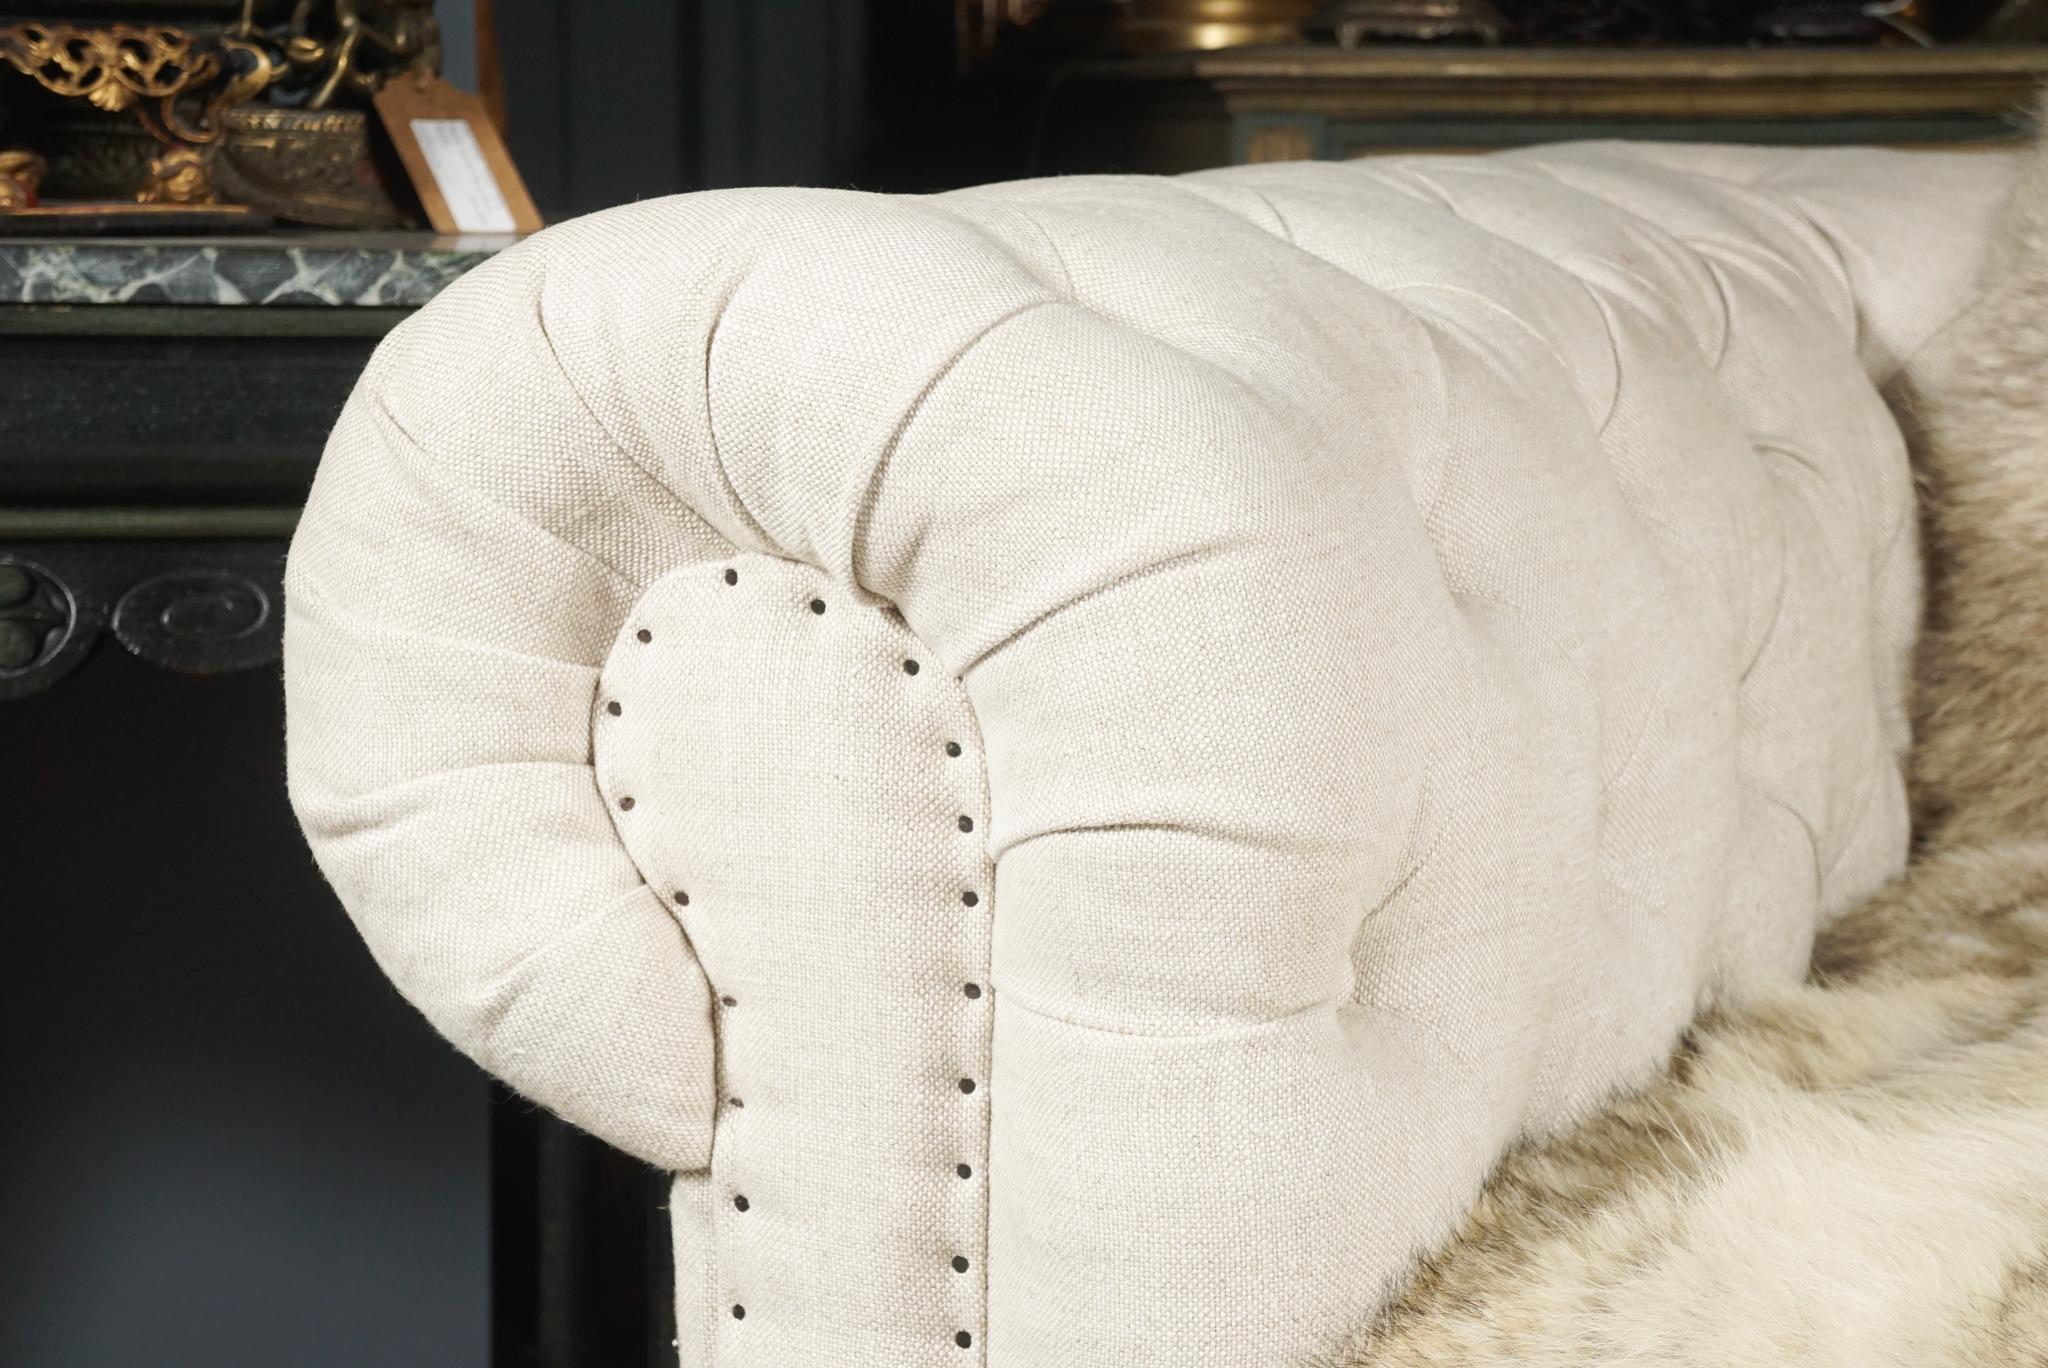 Limed Vintage Edwardian Style Linen Upholstered Button Tufted Chesterfield Sofa For Sale